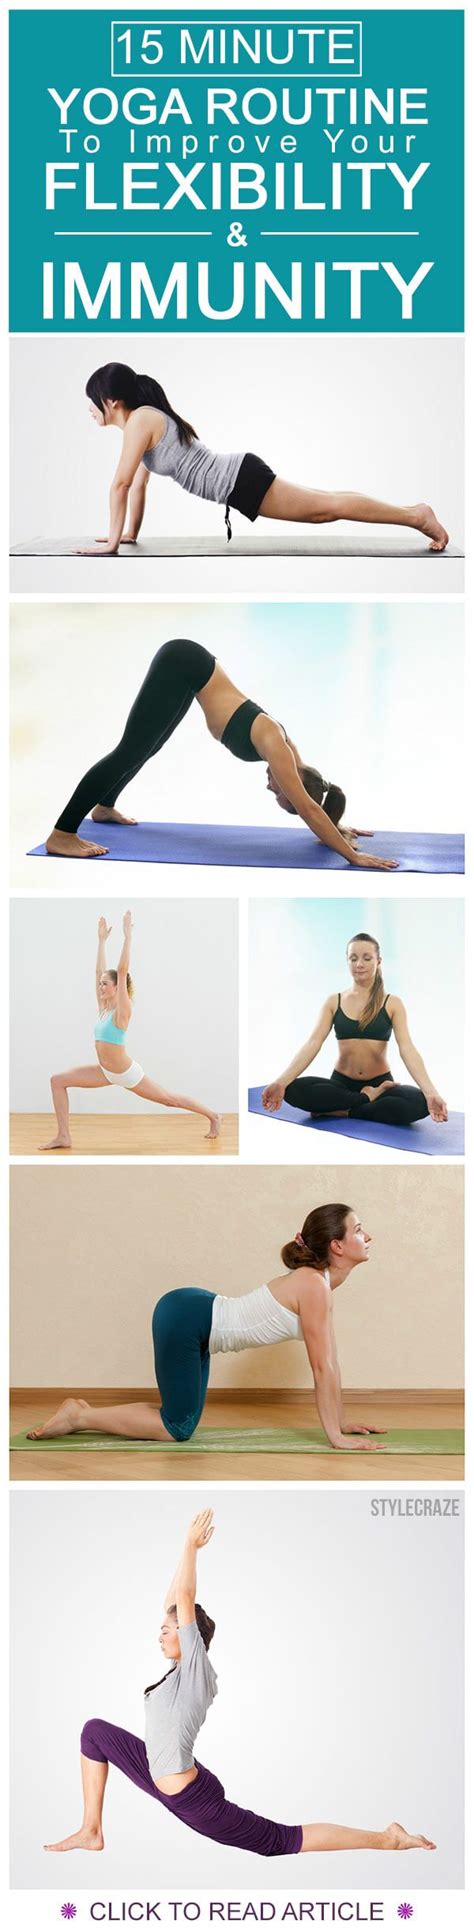 9 Yoga Poses To Improve Your Immunity And Flexibility